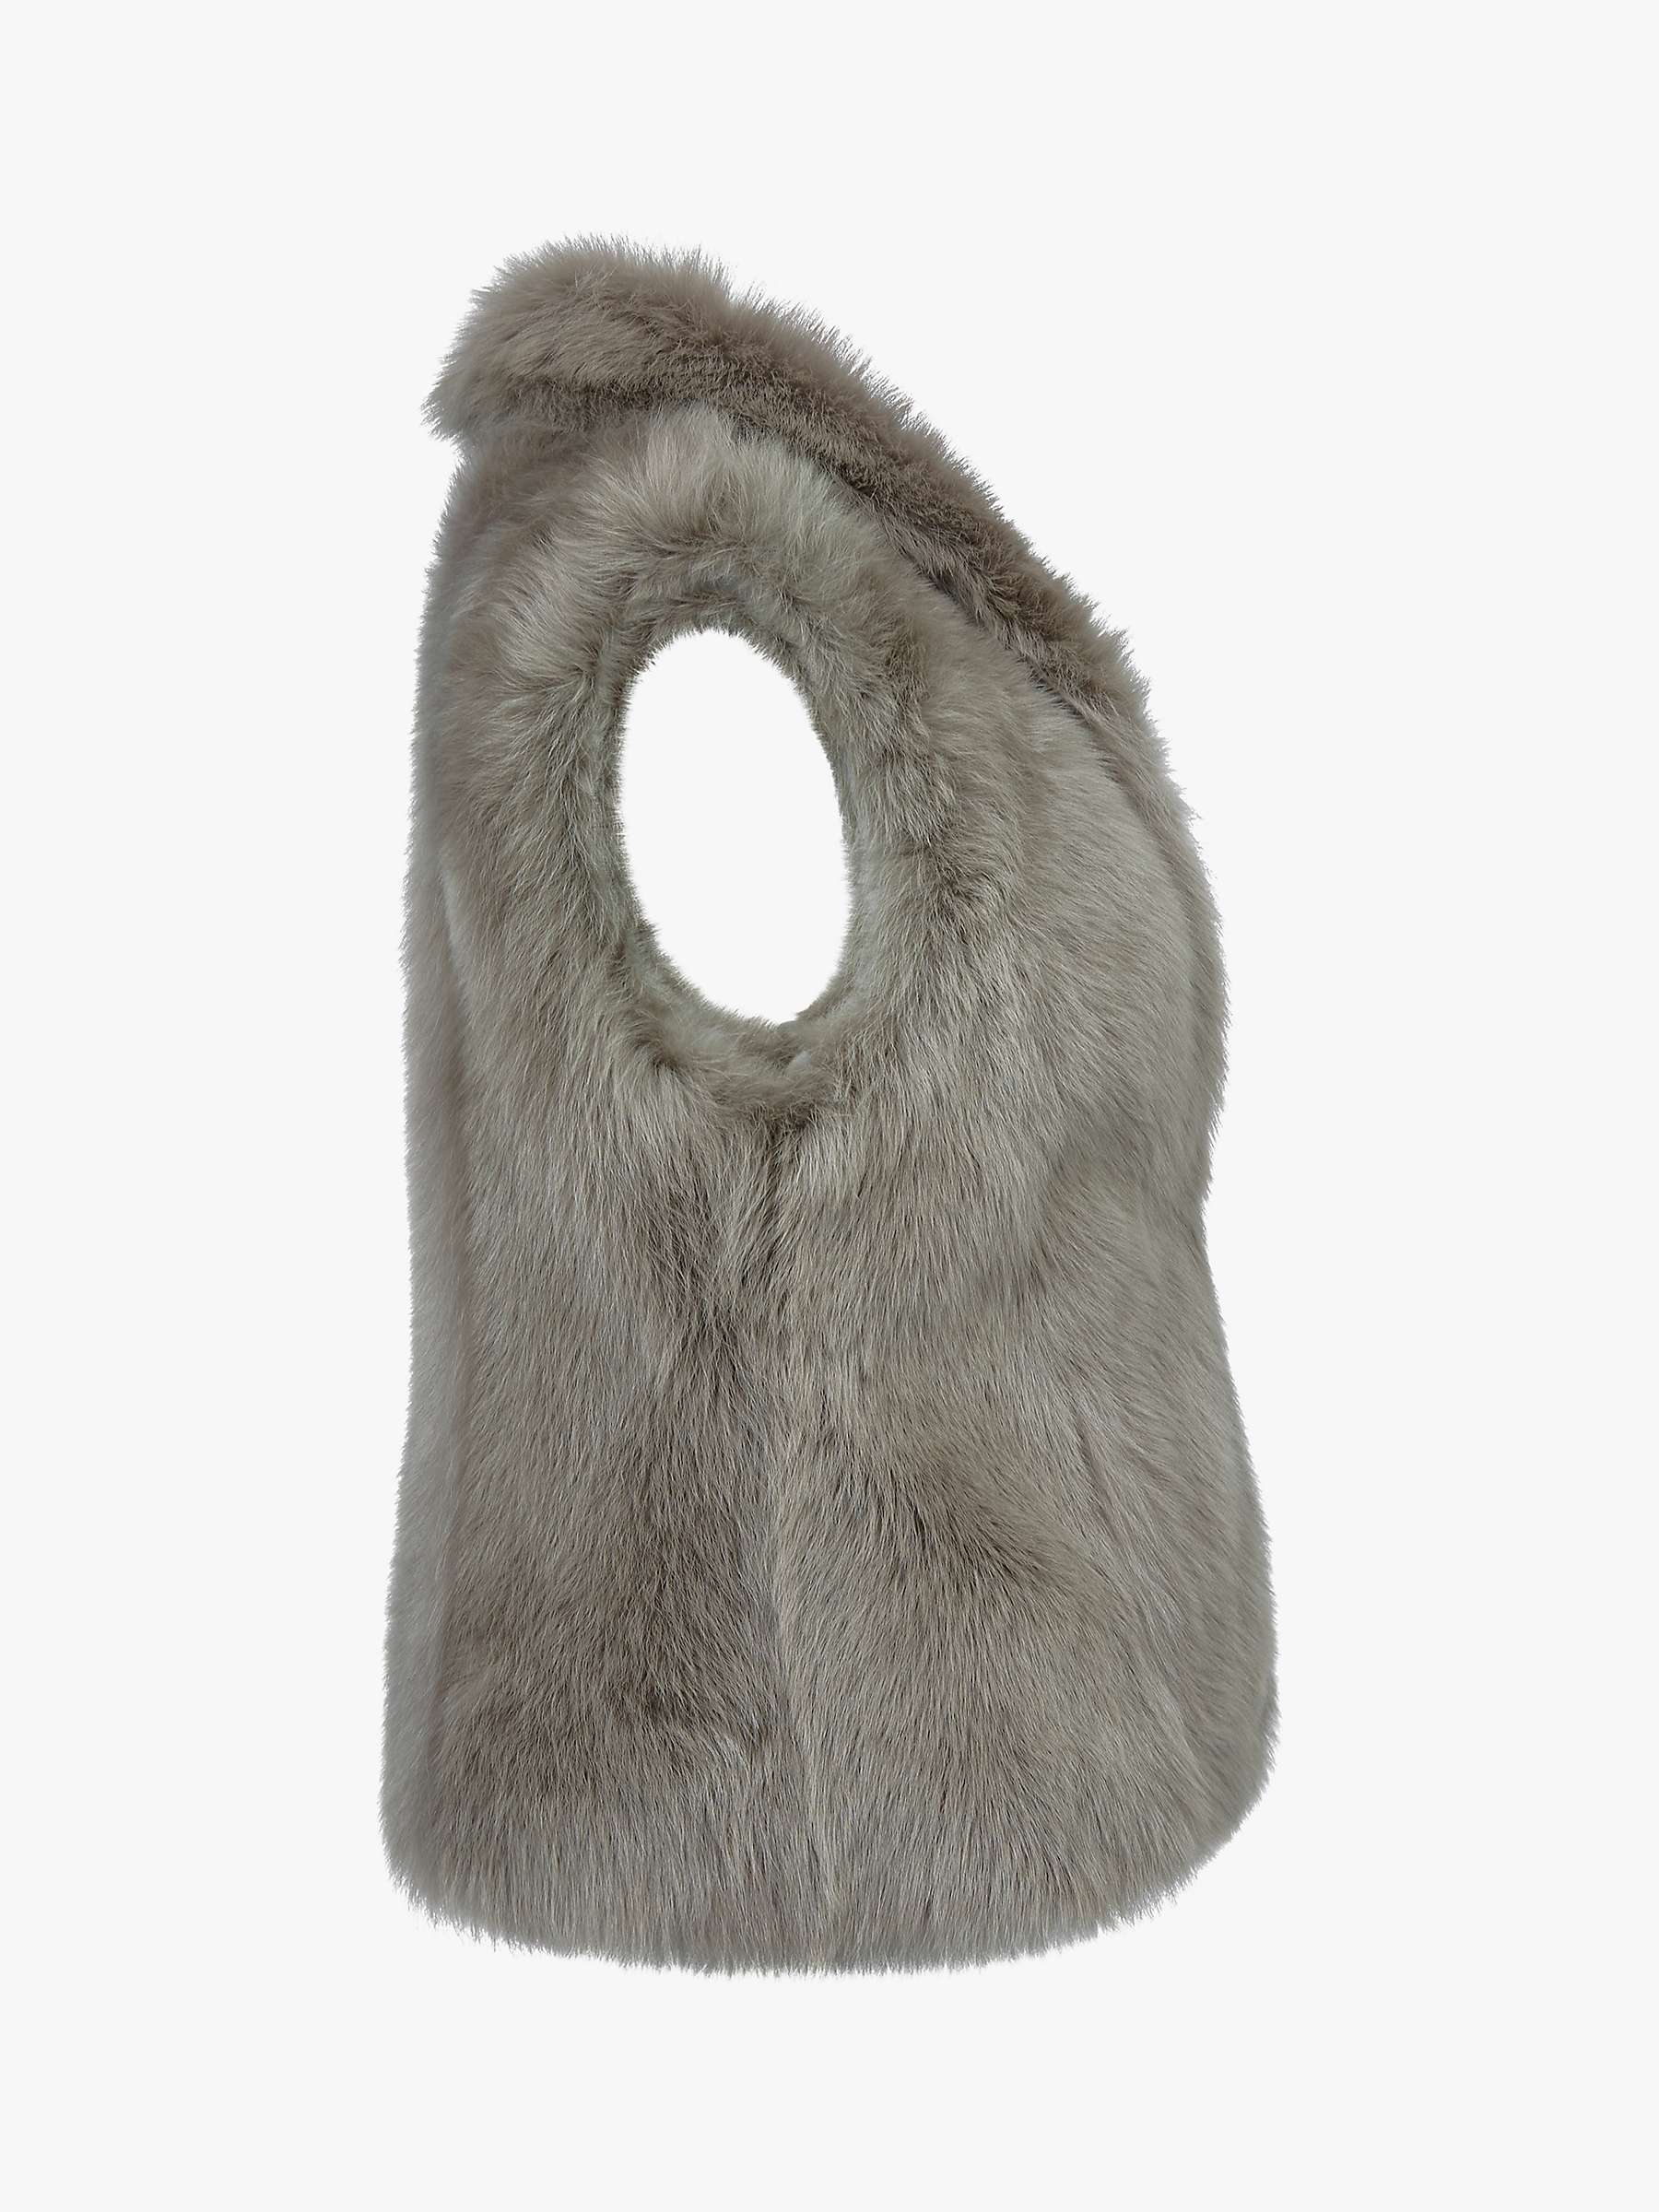 Buy Celtic & Co. Luxe Toscana Gilet Online at johnlewis.com